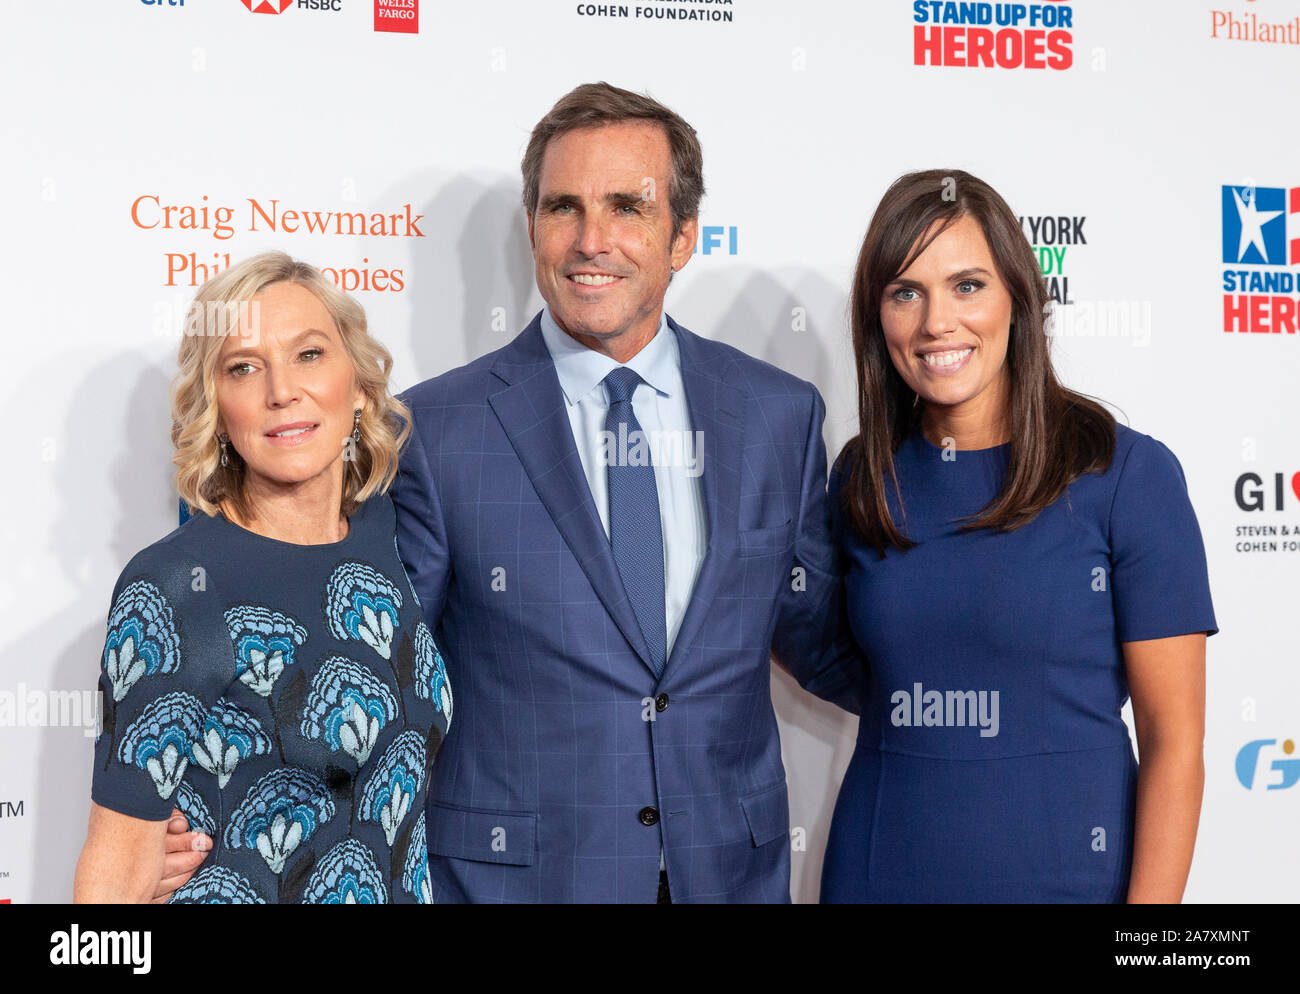 New York, NY - November 4, 2019: Lee Woodruff, Bob Woodruff, Anne Marie  Dougherty attend 13th annual Stand Up for Heroes to benefit the Bob Woodruff  Foundation at The Hulu Theater at